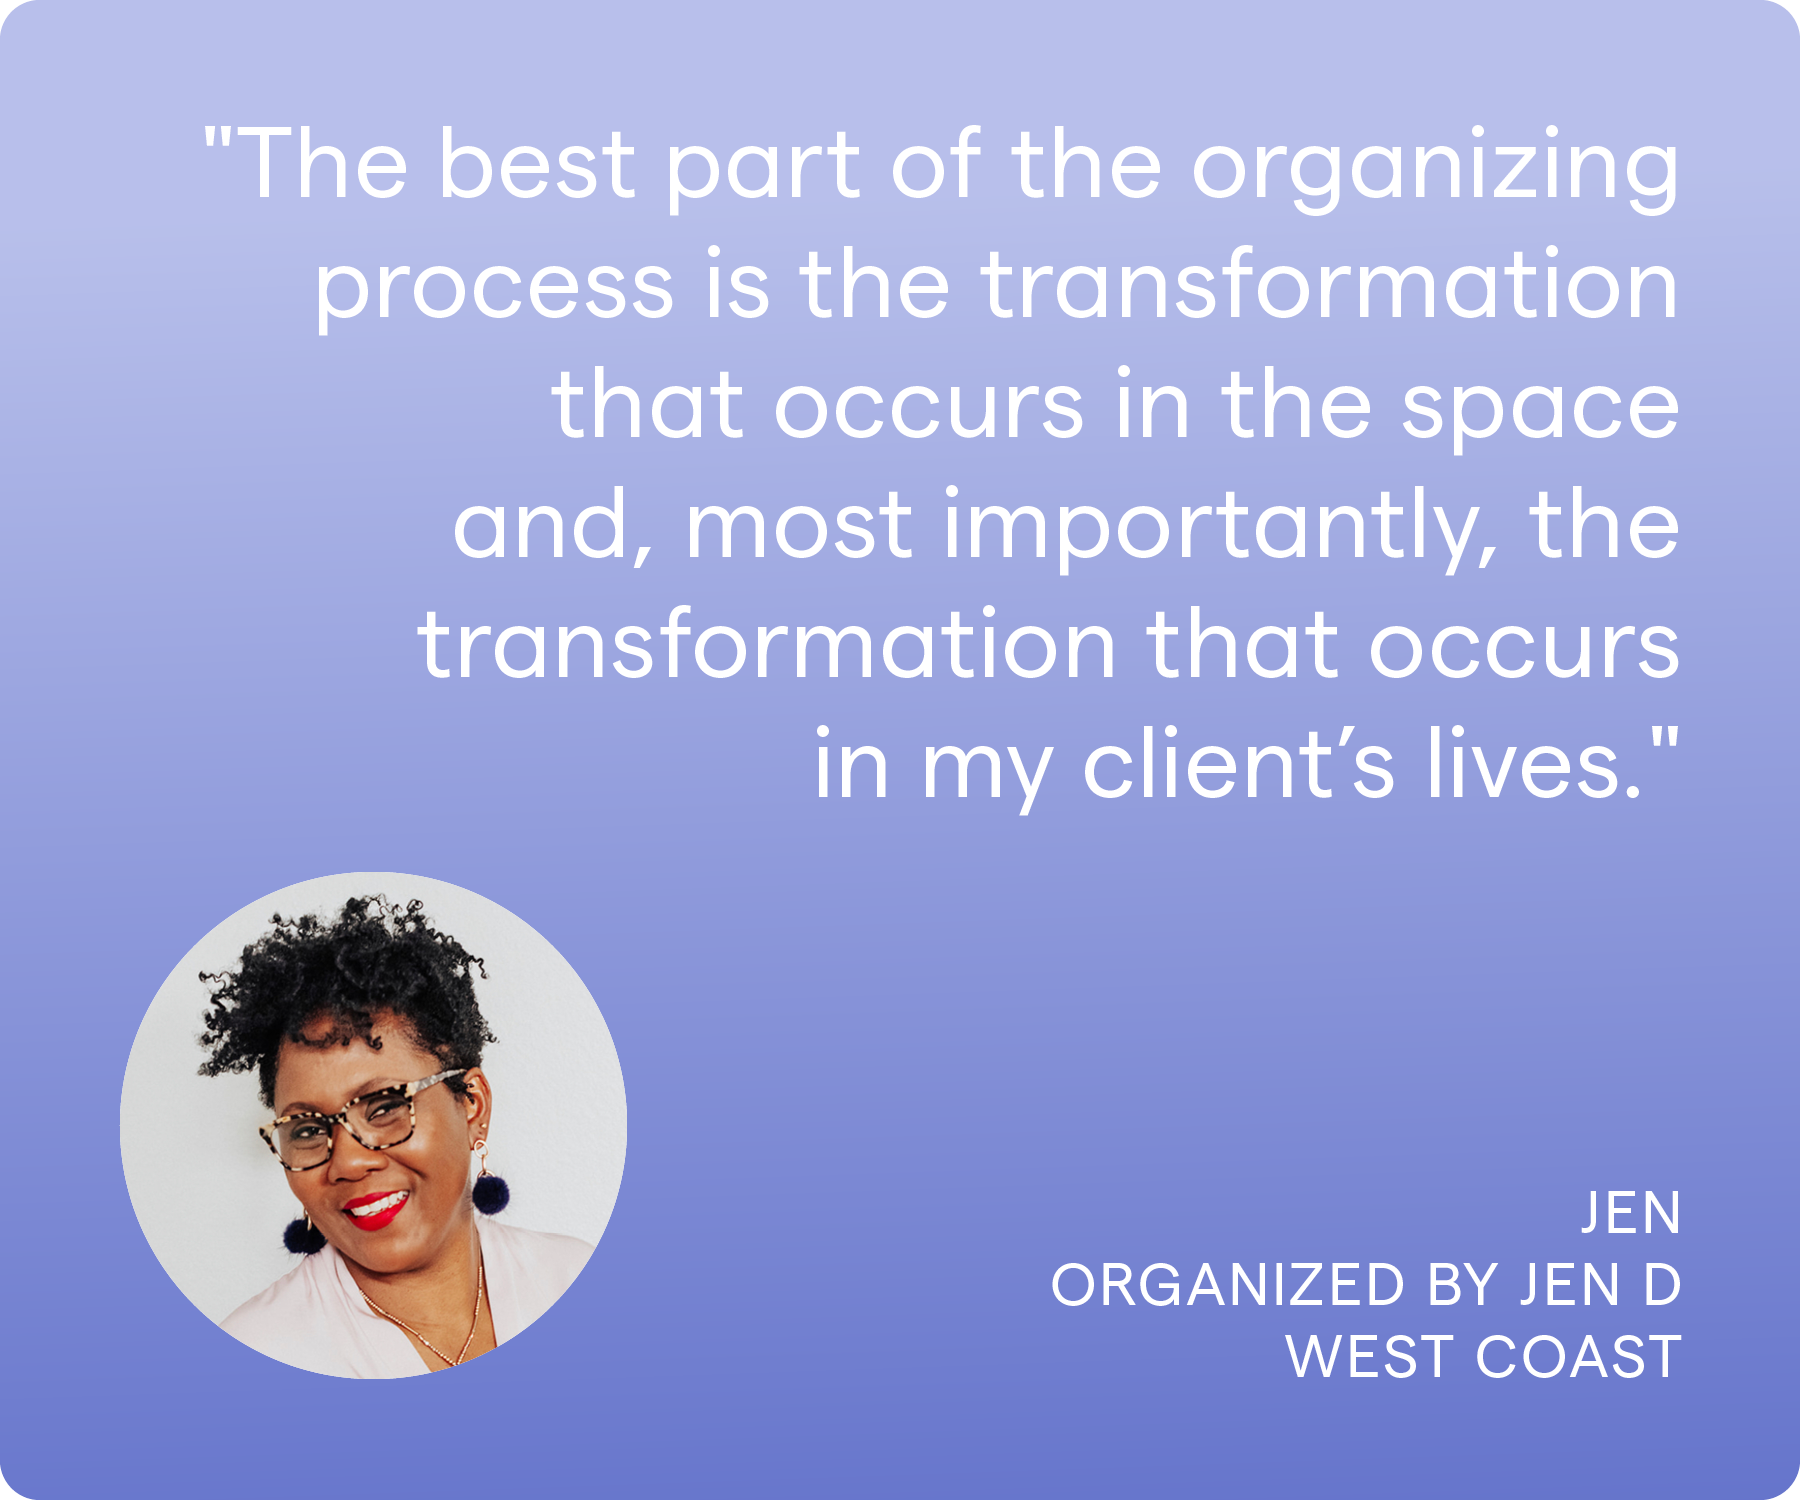 'The best part of the organizing process is the transformation that occurs in the space and, most importantly, the transformation that occurs in my client's lives.' Jen, Organized by Jen D, West Coast